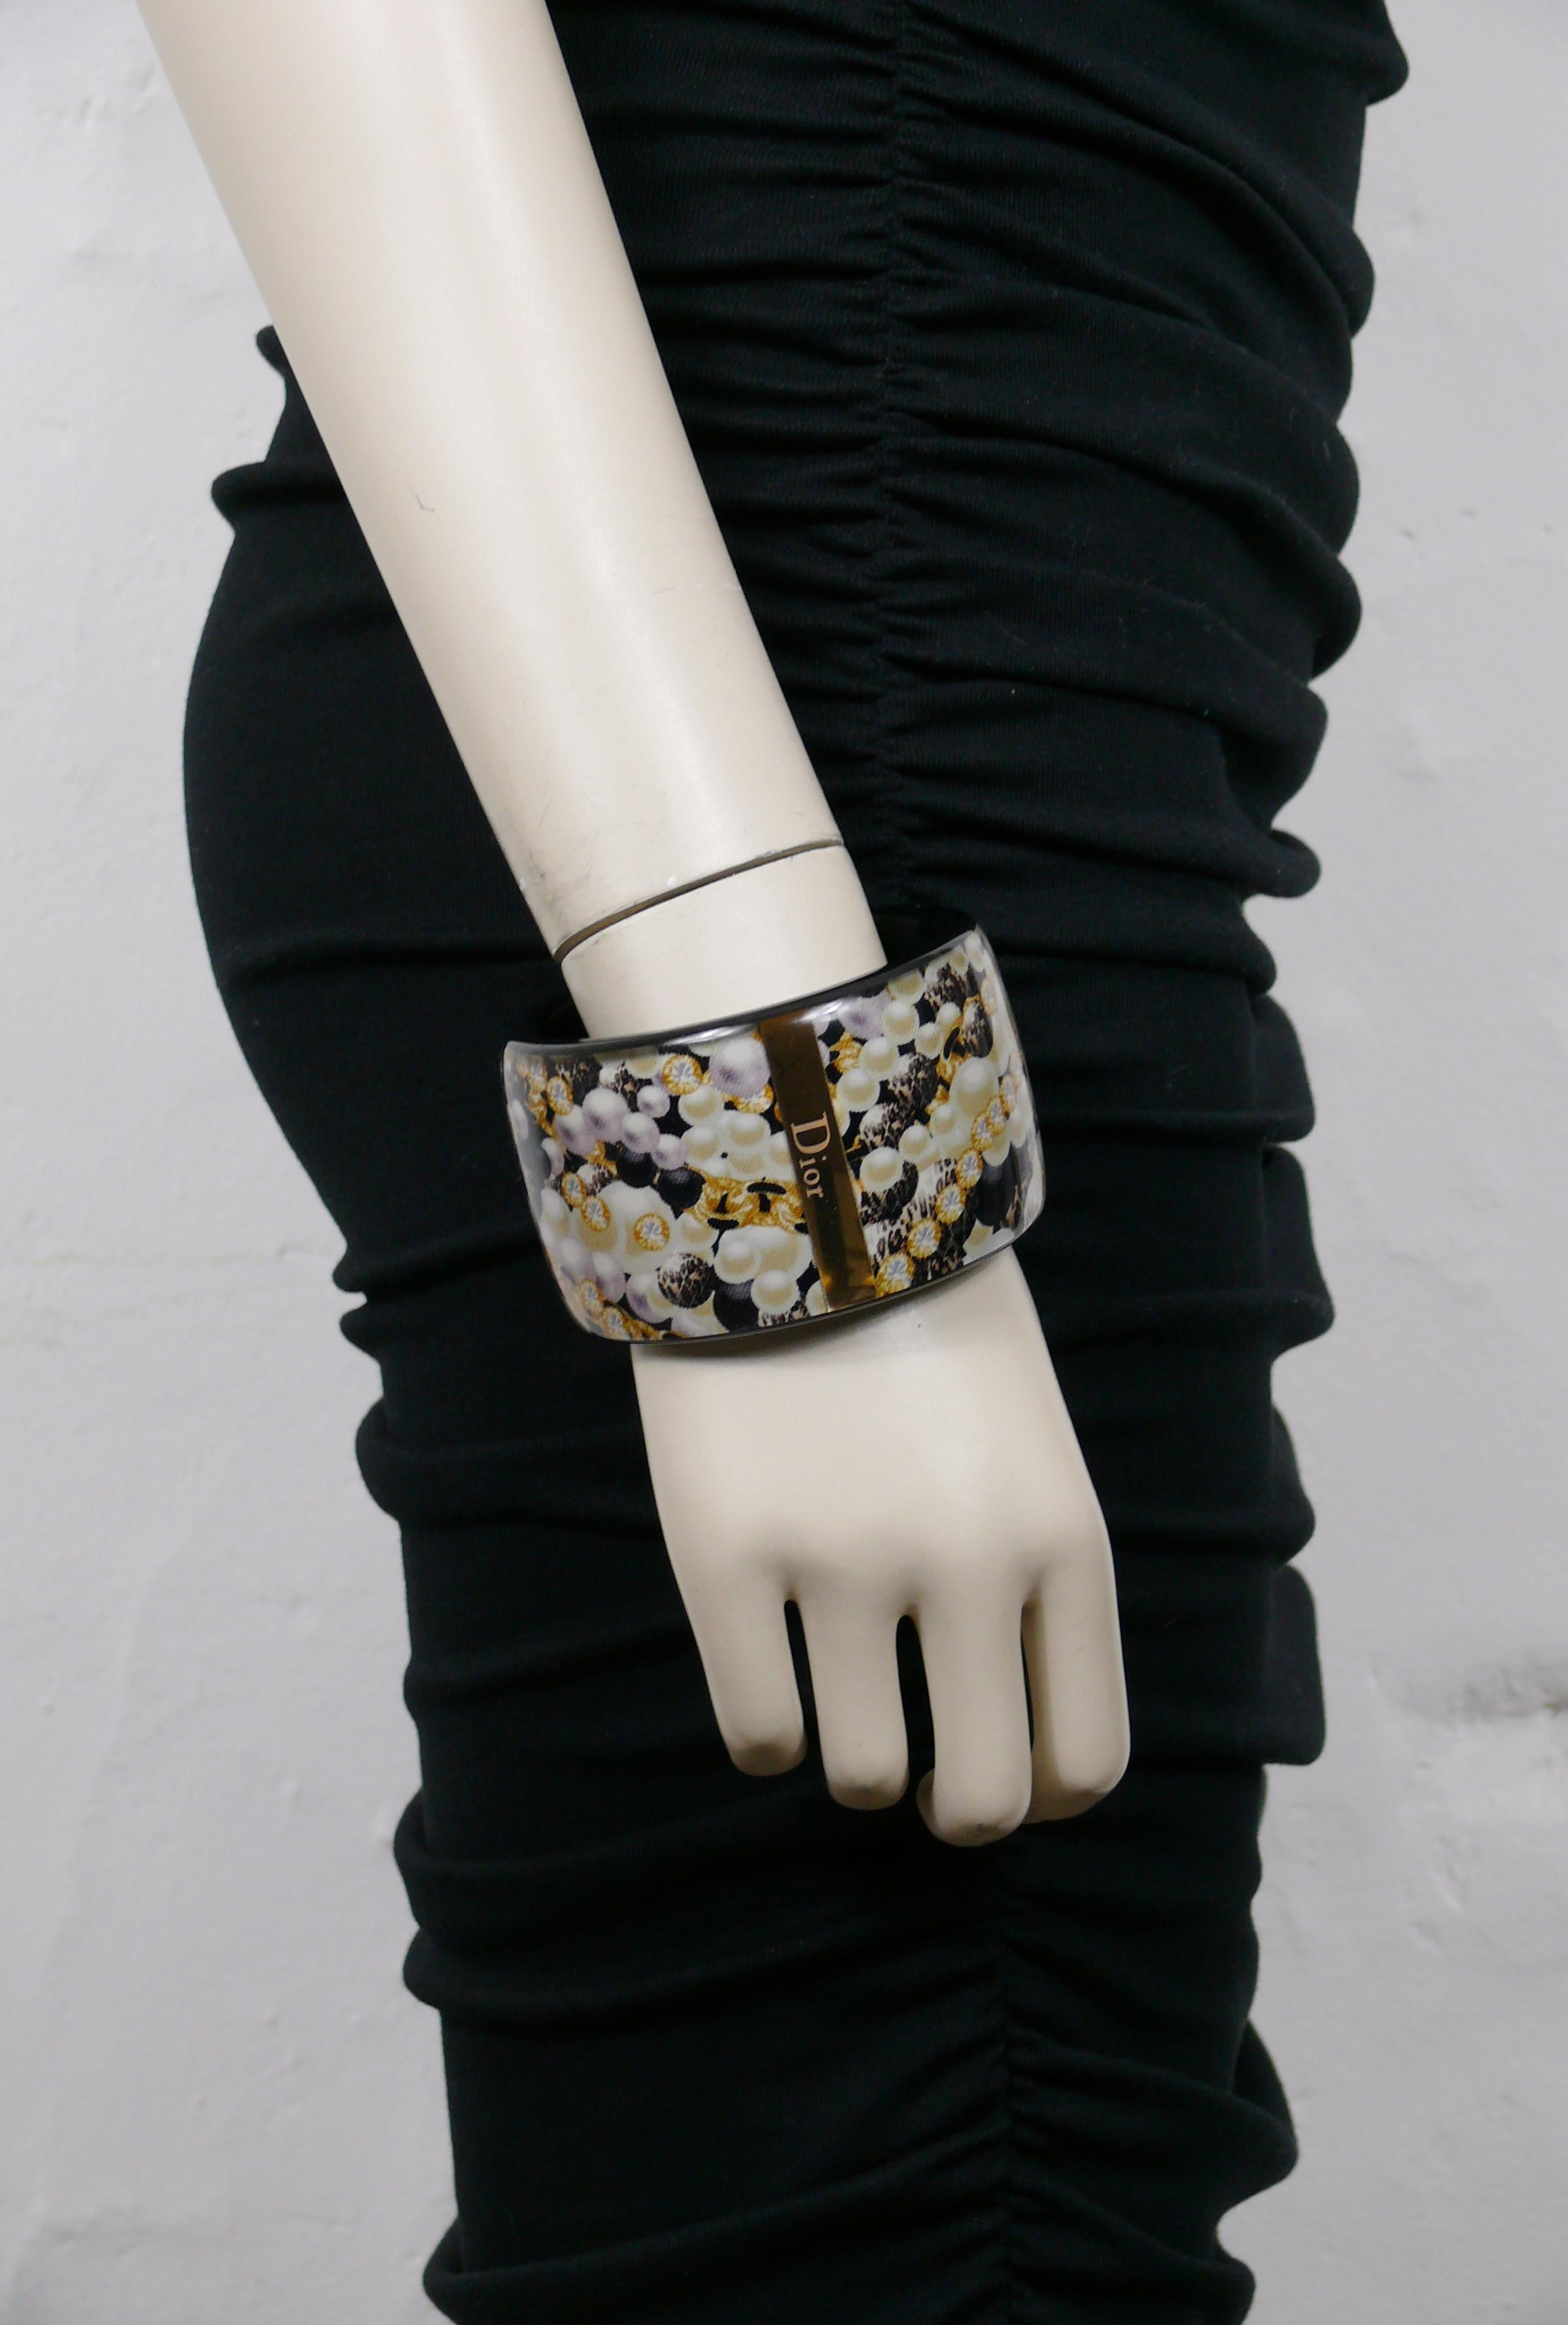 CHRISTIAN DIOR black resin cuff bracelet featuring a jewelry print (pearls, crystals, brooch) inlaid.

Embossed DIOR on a gold tone metal inlaid.

Indicative measurements : inner circumference approx. 20.42 cm (8.04 inches) / width approx. 4.9 cm